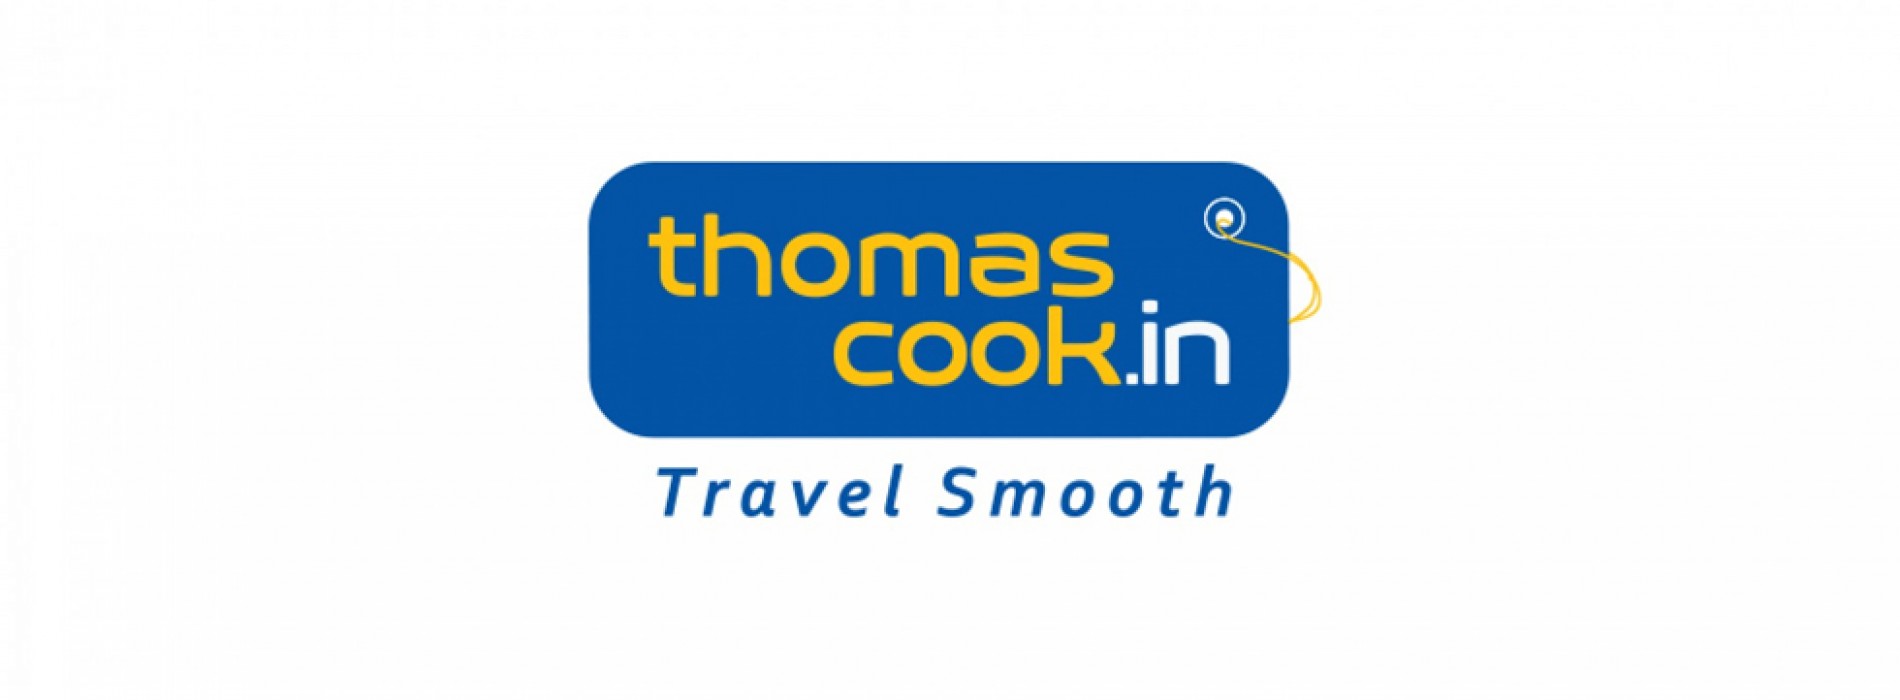 Thomas Cook India targets the strong growth potential of smaller catchments within the NCR market